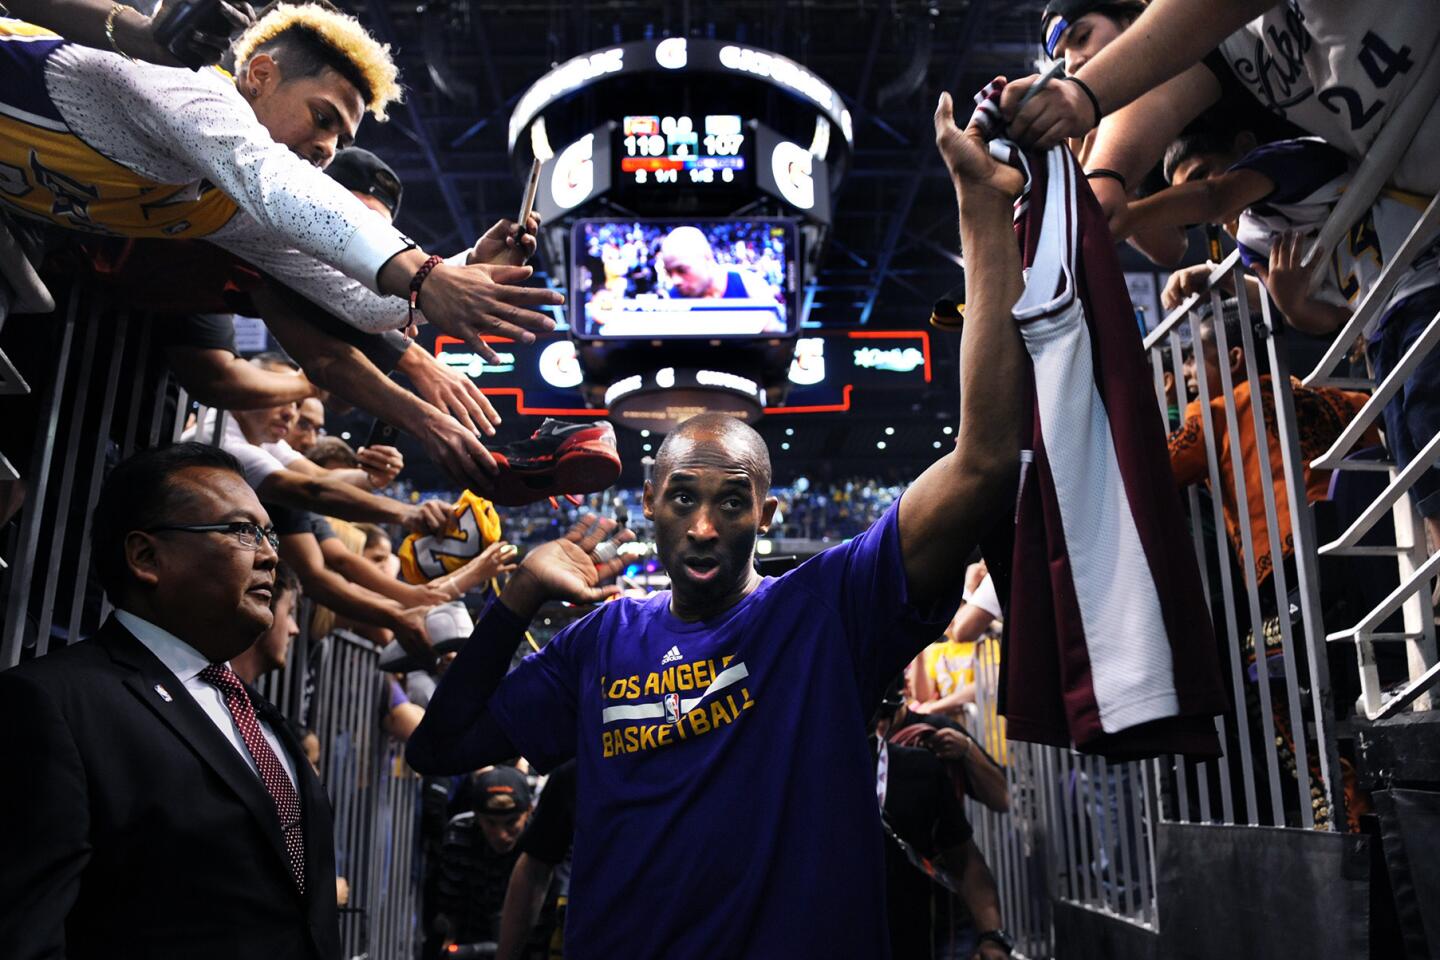 Lakers Kobe Bryant walks off the court for the last time after a game agianst the Suns in Phoenix on March 23.